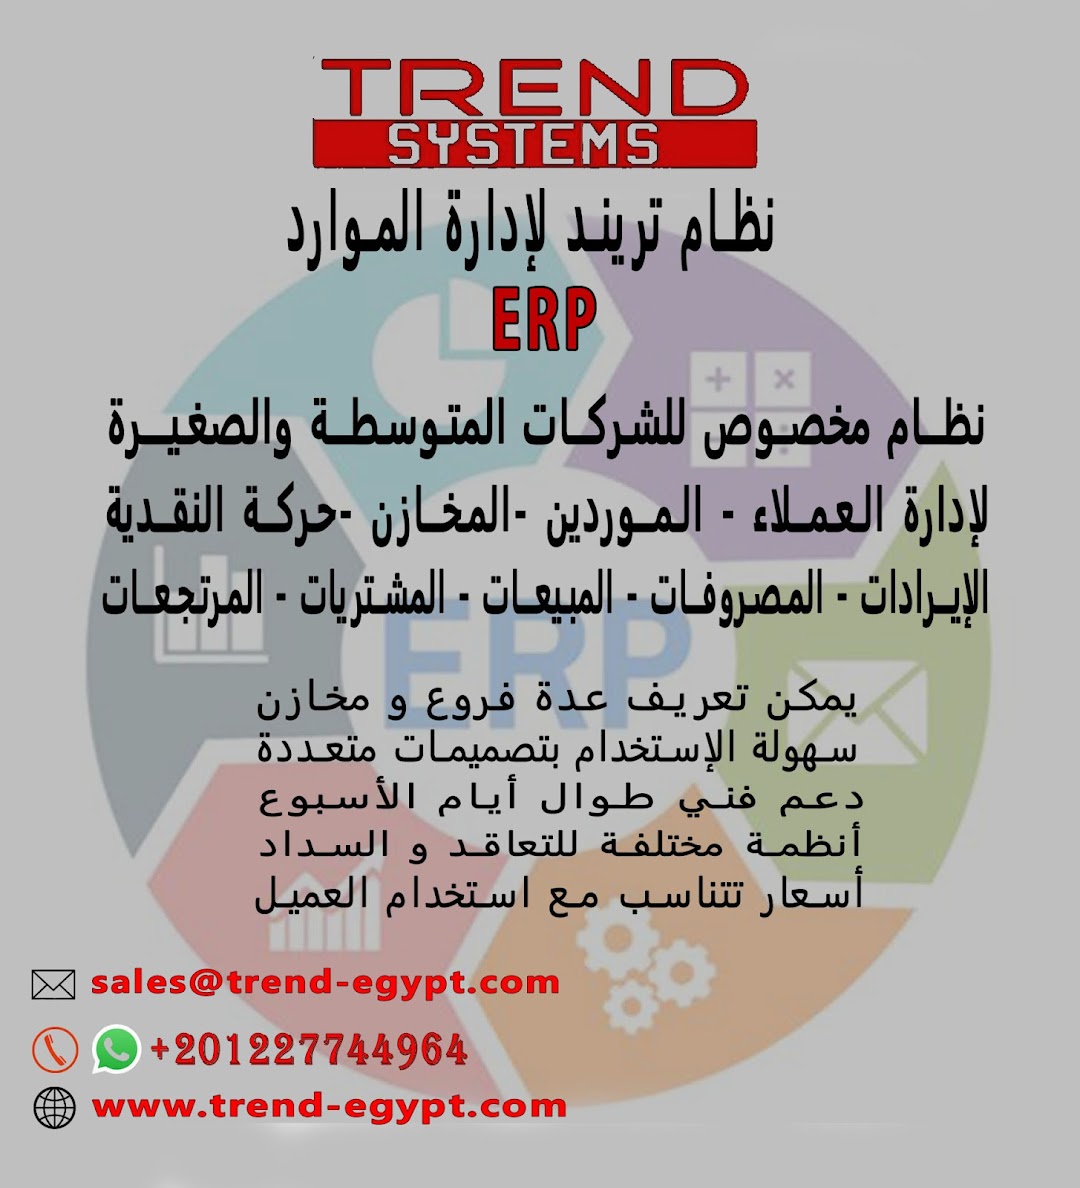 Trend Egypt for Systems